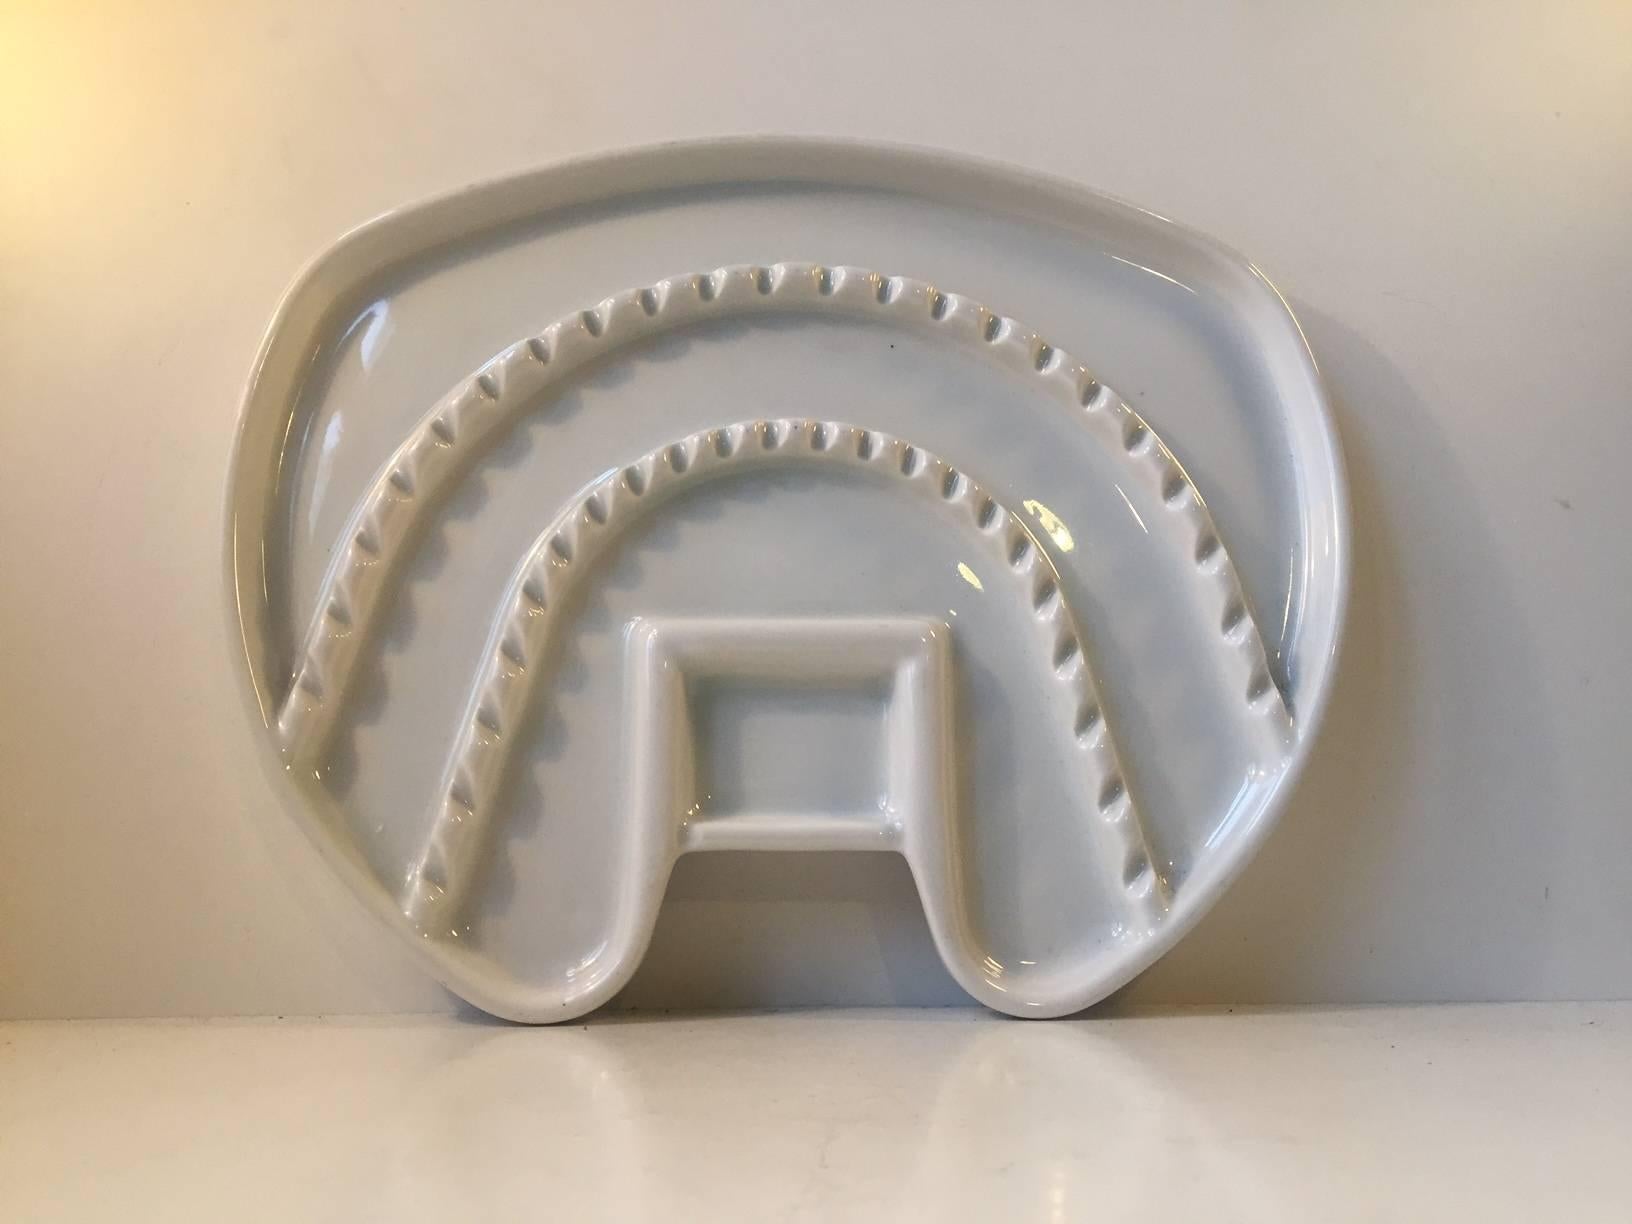 Striking heavy white tooth shaped porcelain tray used by a Dentist in the Southern part of Denmark during the 1930s. Manufactured in Germany probably on order. Beautiful intact antique condition.